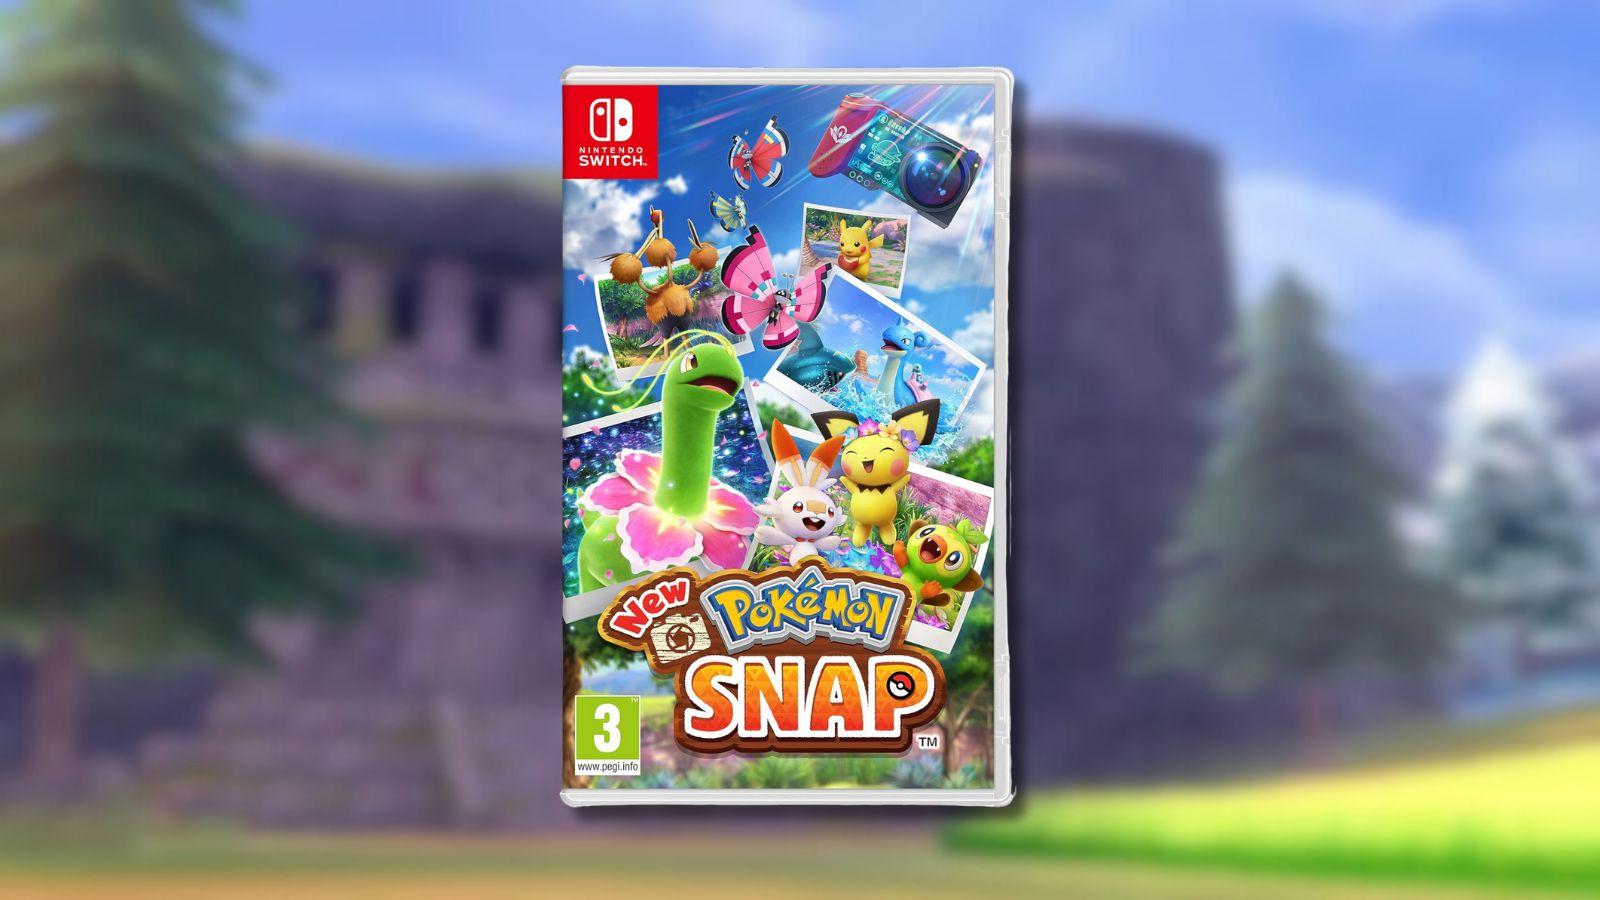 New Pokemon Snap with Pokemon Sword and Shield background.